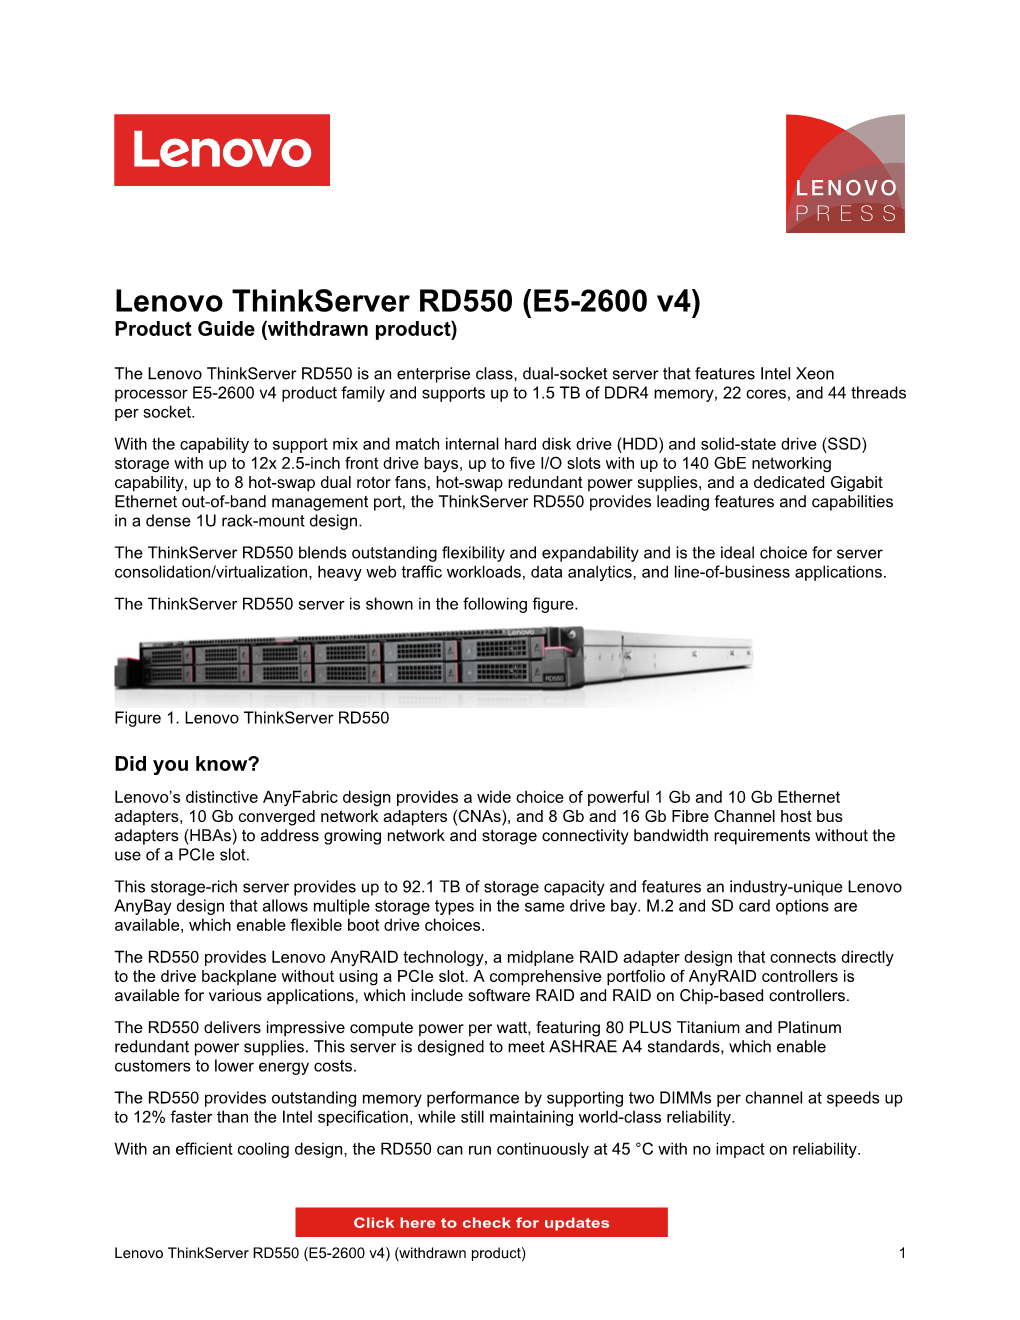 Lenovo Thinkserver RD550 (E5-2600 V4) (Withdrawn Product) 1 Key Features the Thinkserver RD550 Offers Performance and Capacity of a 2U System in a 1U Rack Form Factor